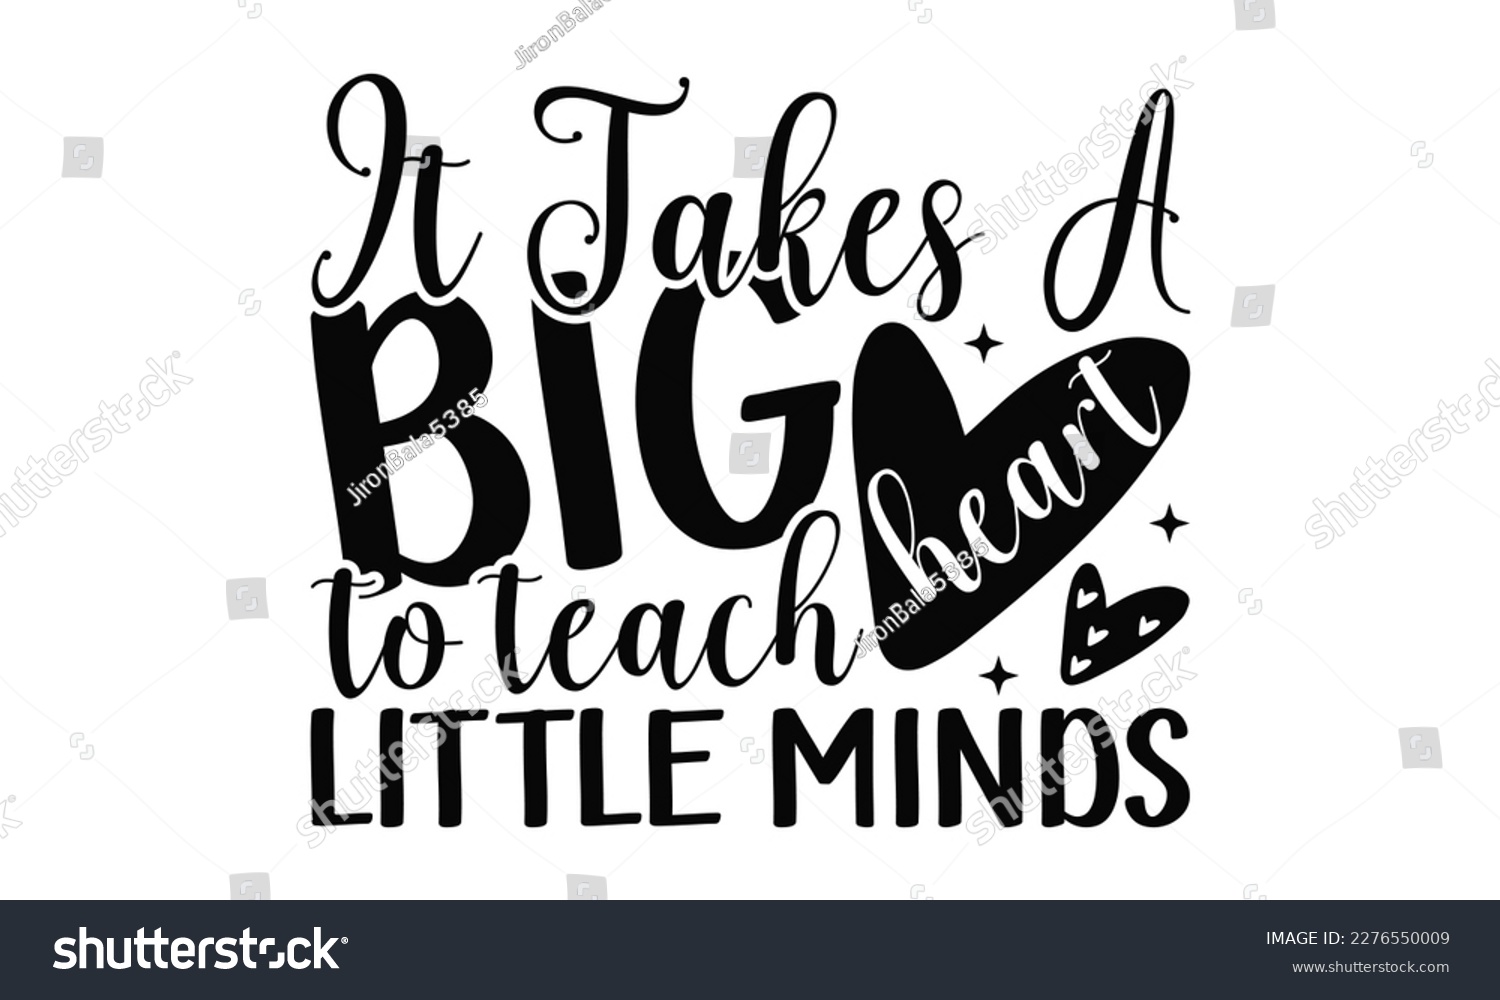 SVG of It Takes A Big Heart To Teach Little Minds - Teacher SVG Design, Calligraphy graphic design, this illustration can be used as a print on t-shirts, bags, stationary or as a poster.
 svg